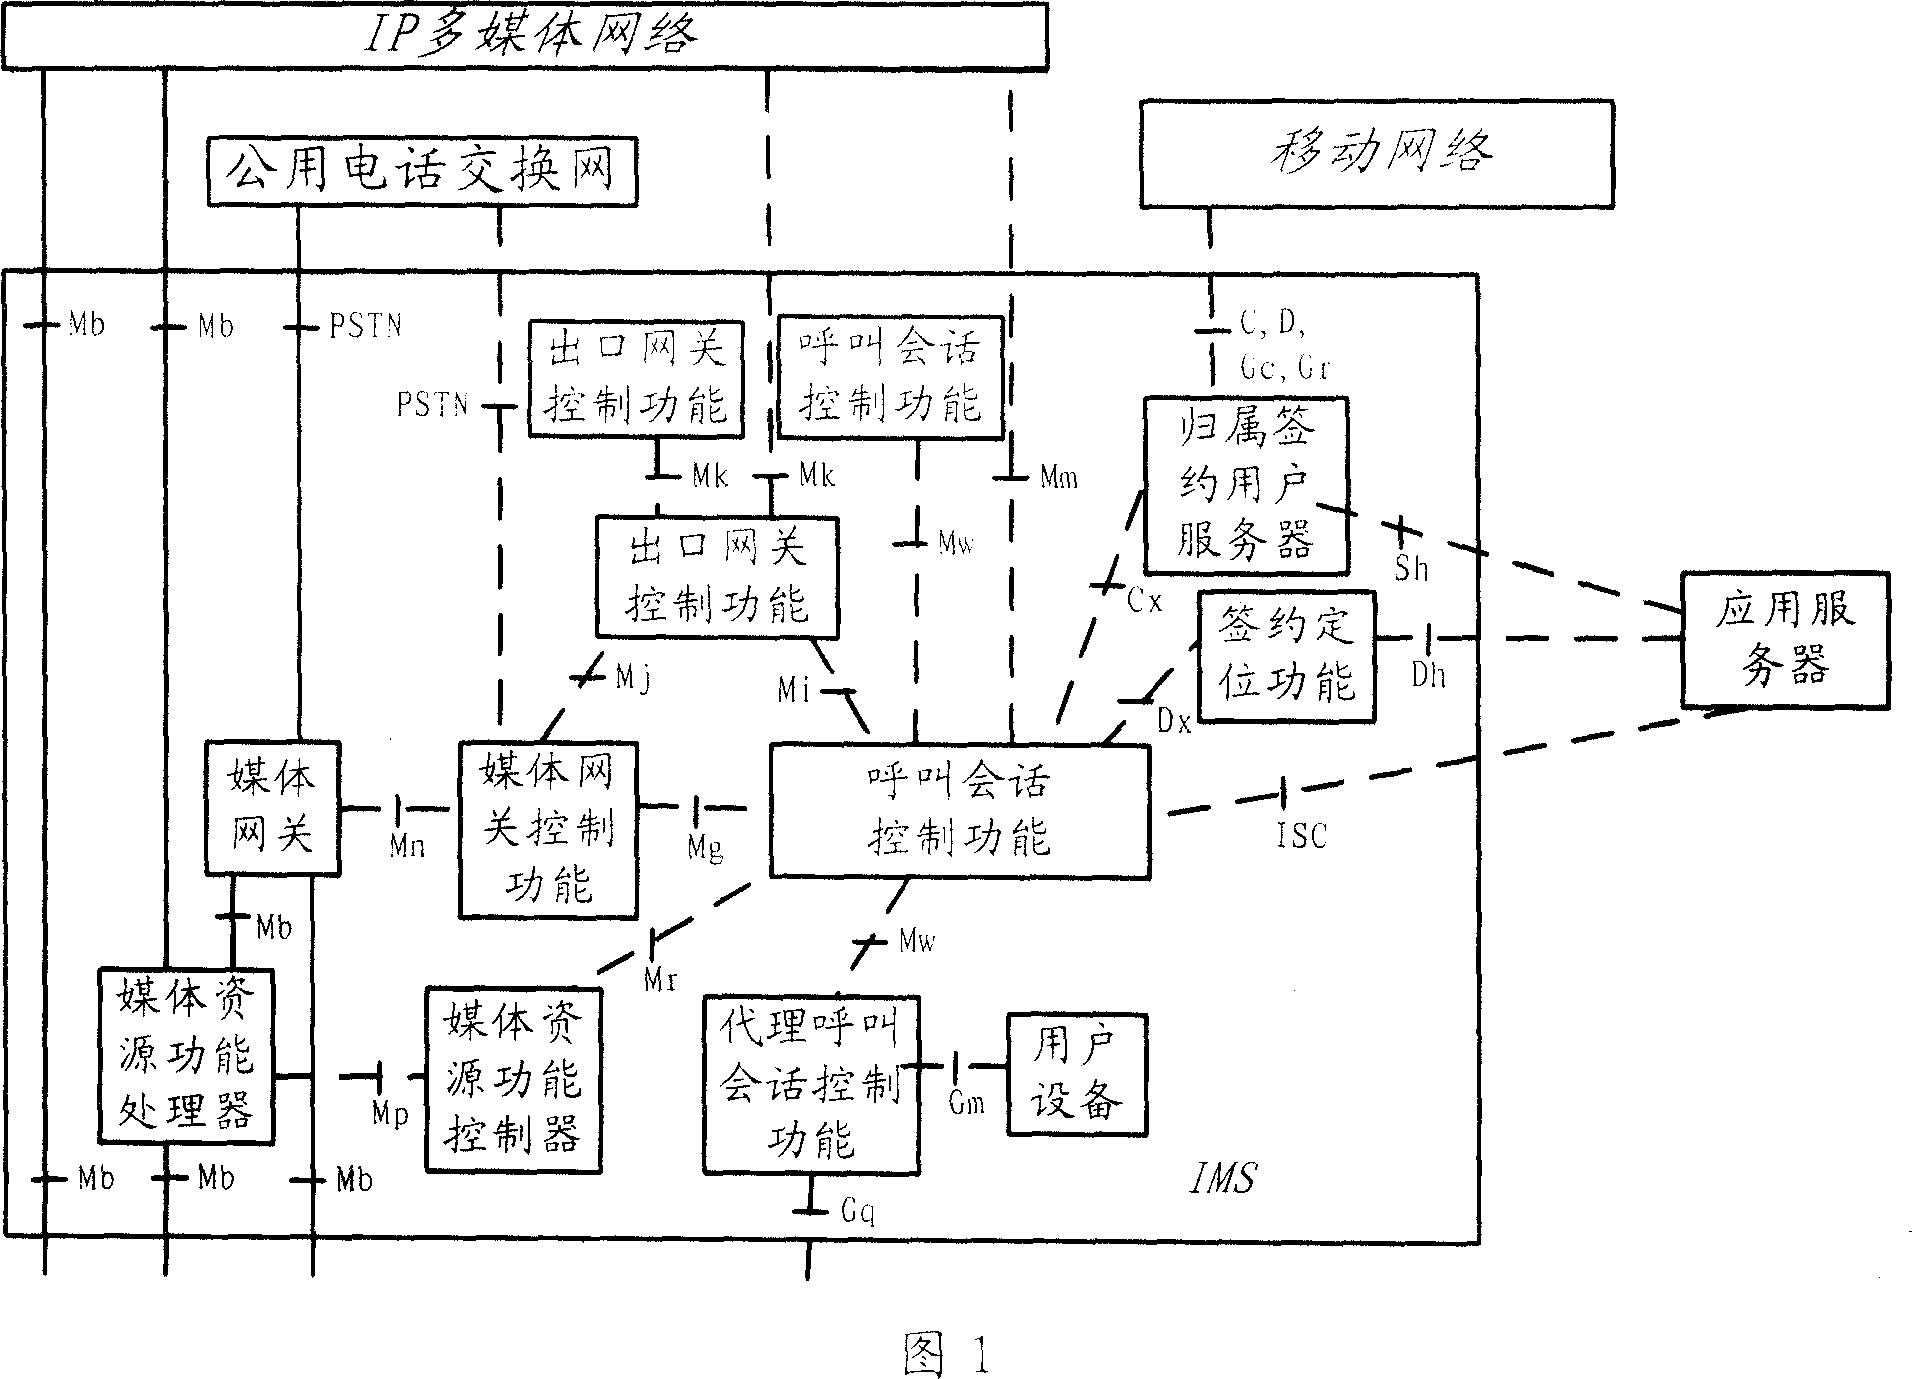 Method for providing service to circuit field user via group field